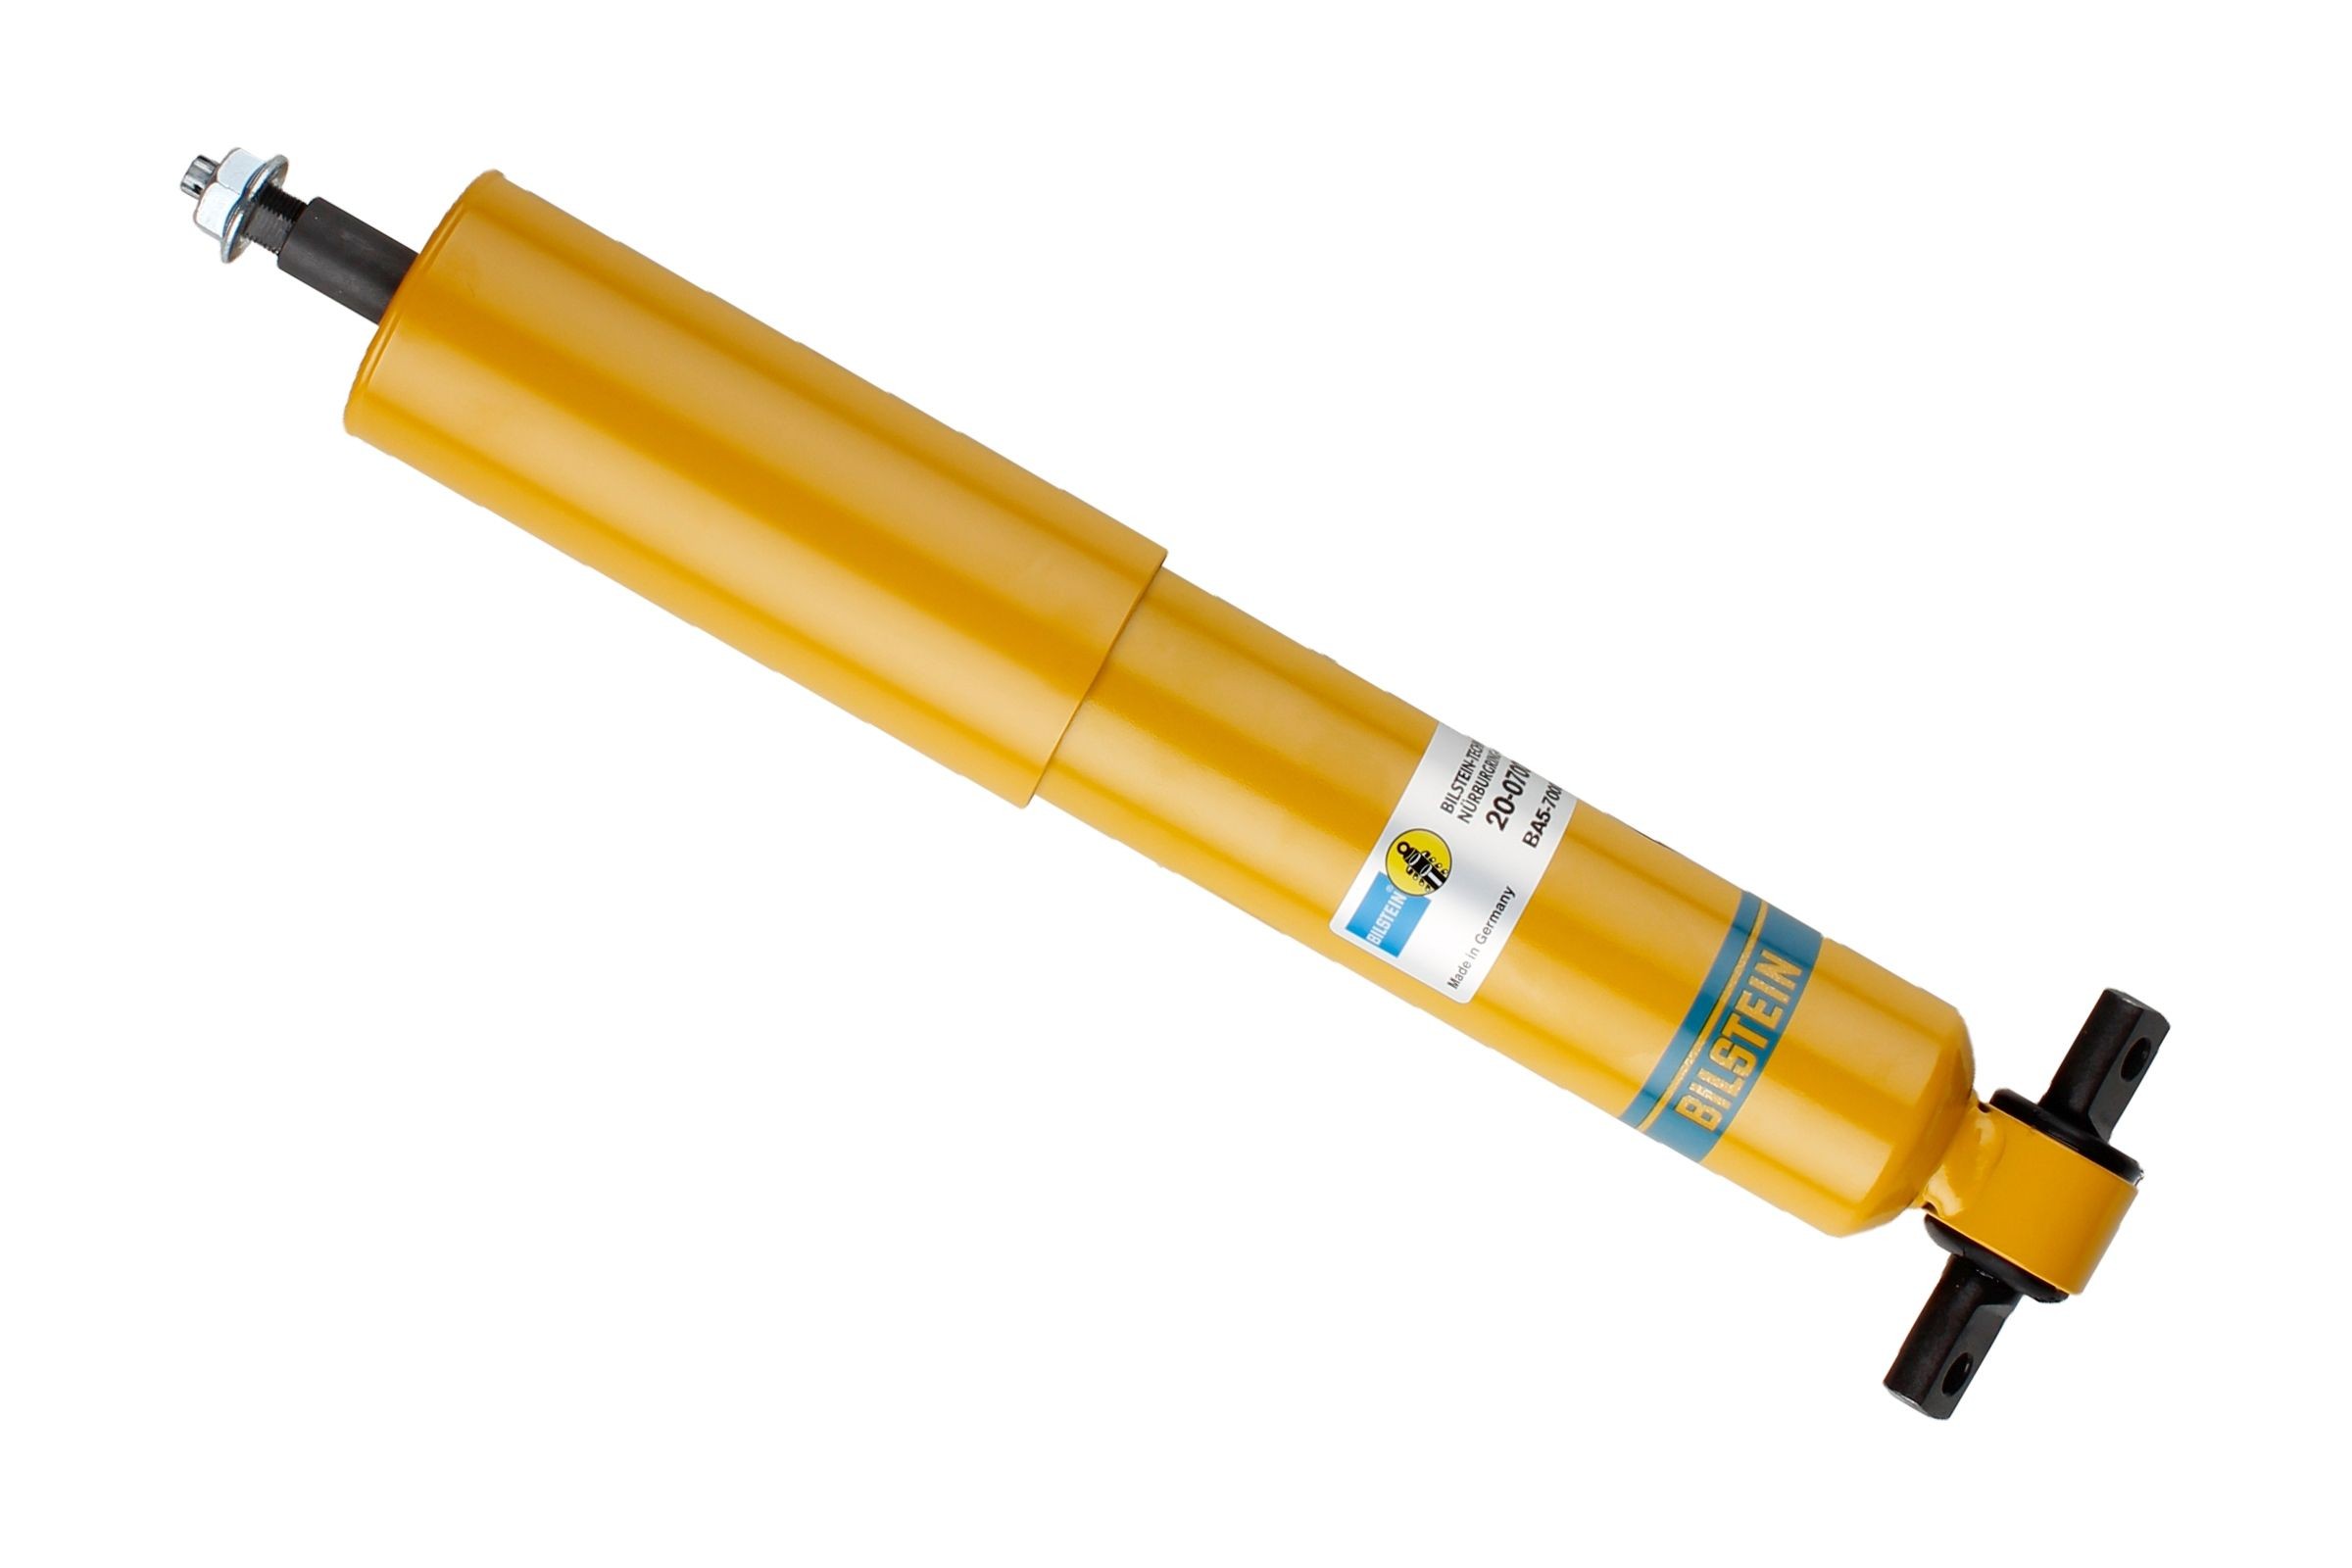 BA5-7000 BILSTEIN - B6 Performance Front Axle, Gas Pressure, Monotube, Absorber does not carry a spring, Bottom Yoke, Top pin Shocks 20-070007 buy